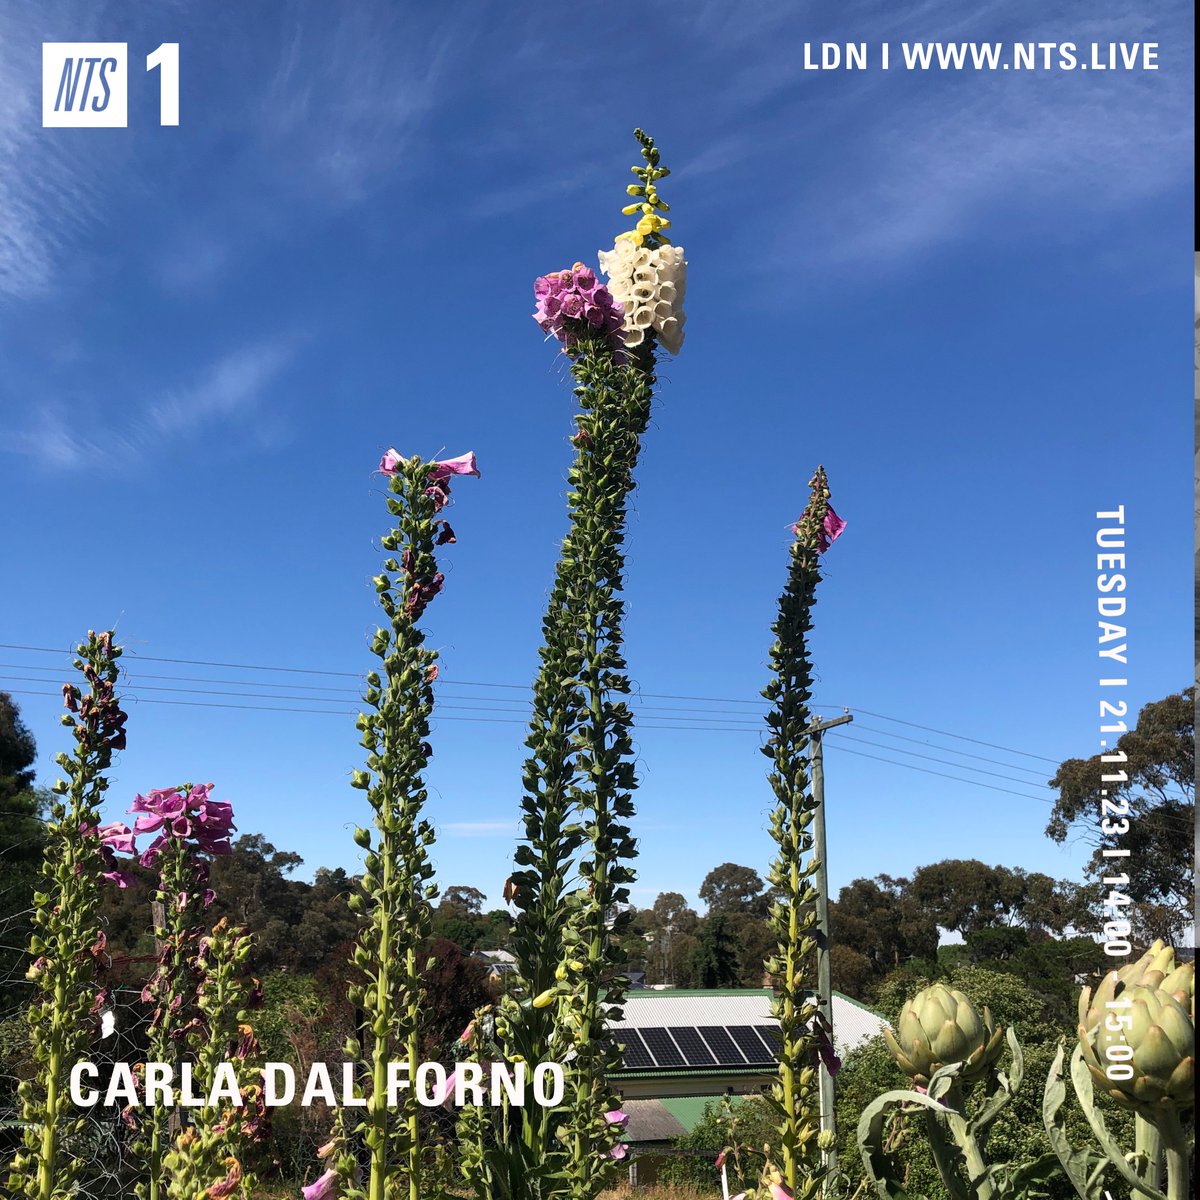 Back playing tunes for you this arvo on @NTSlive